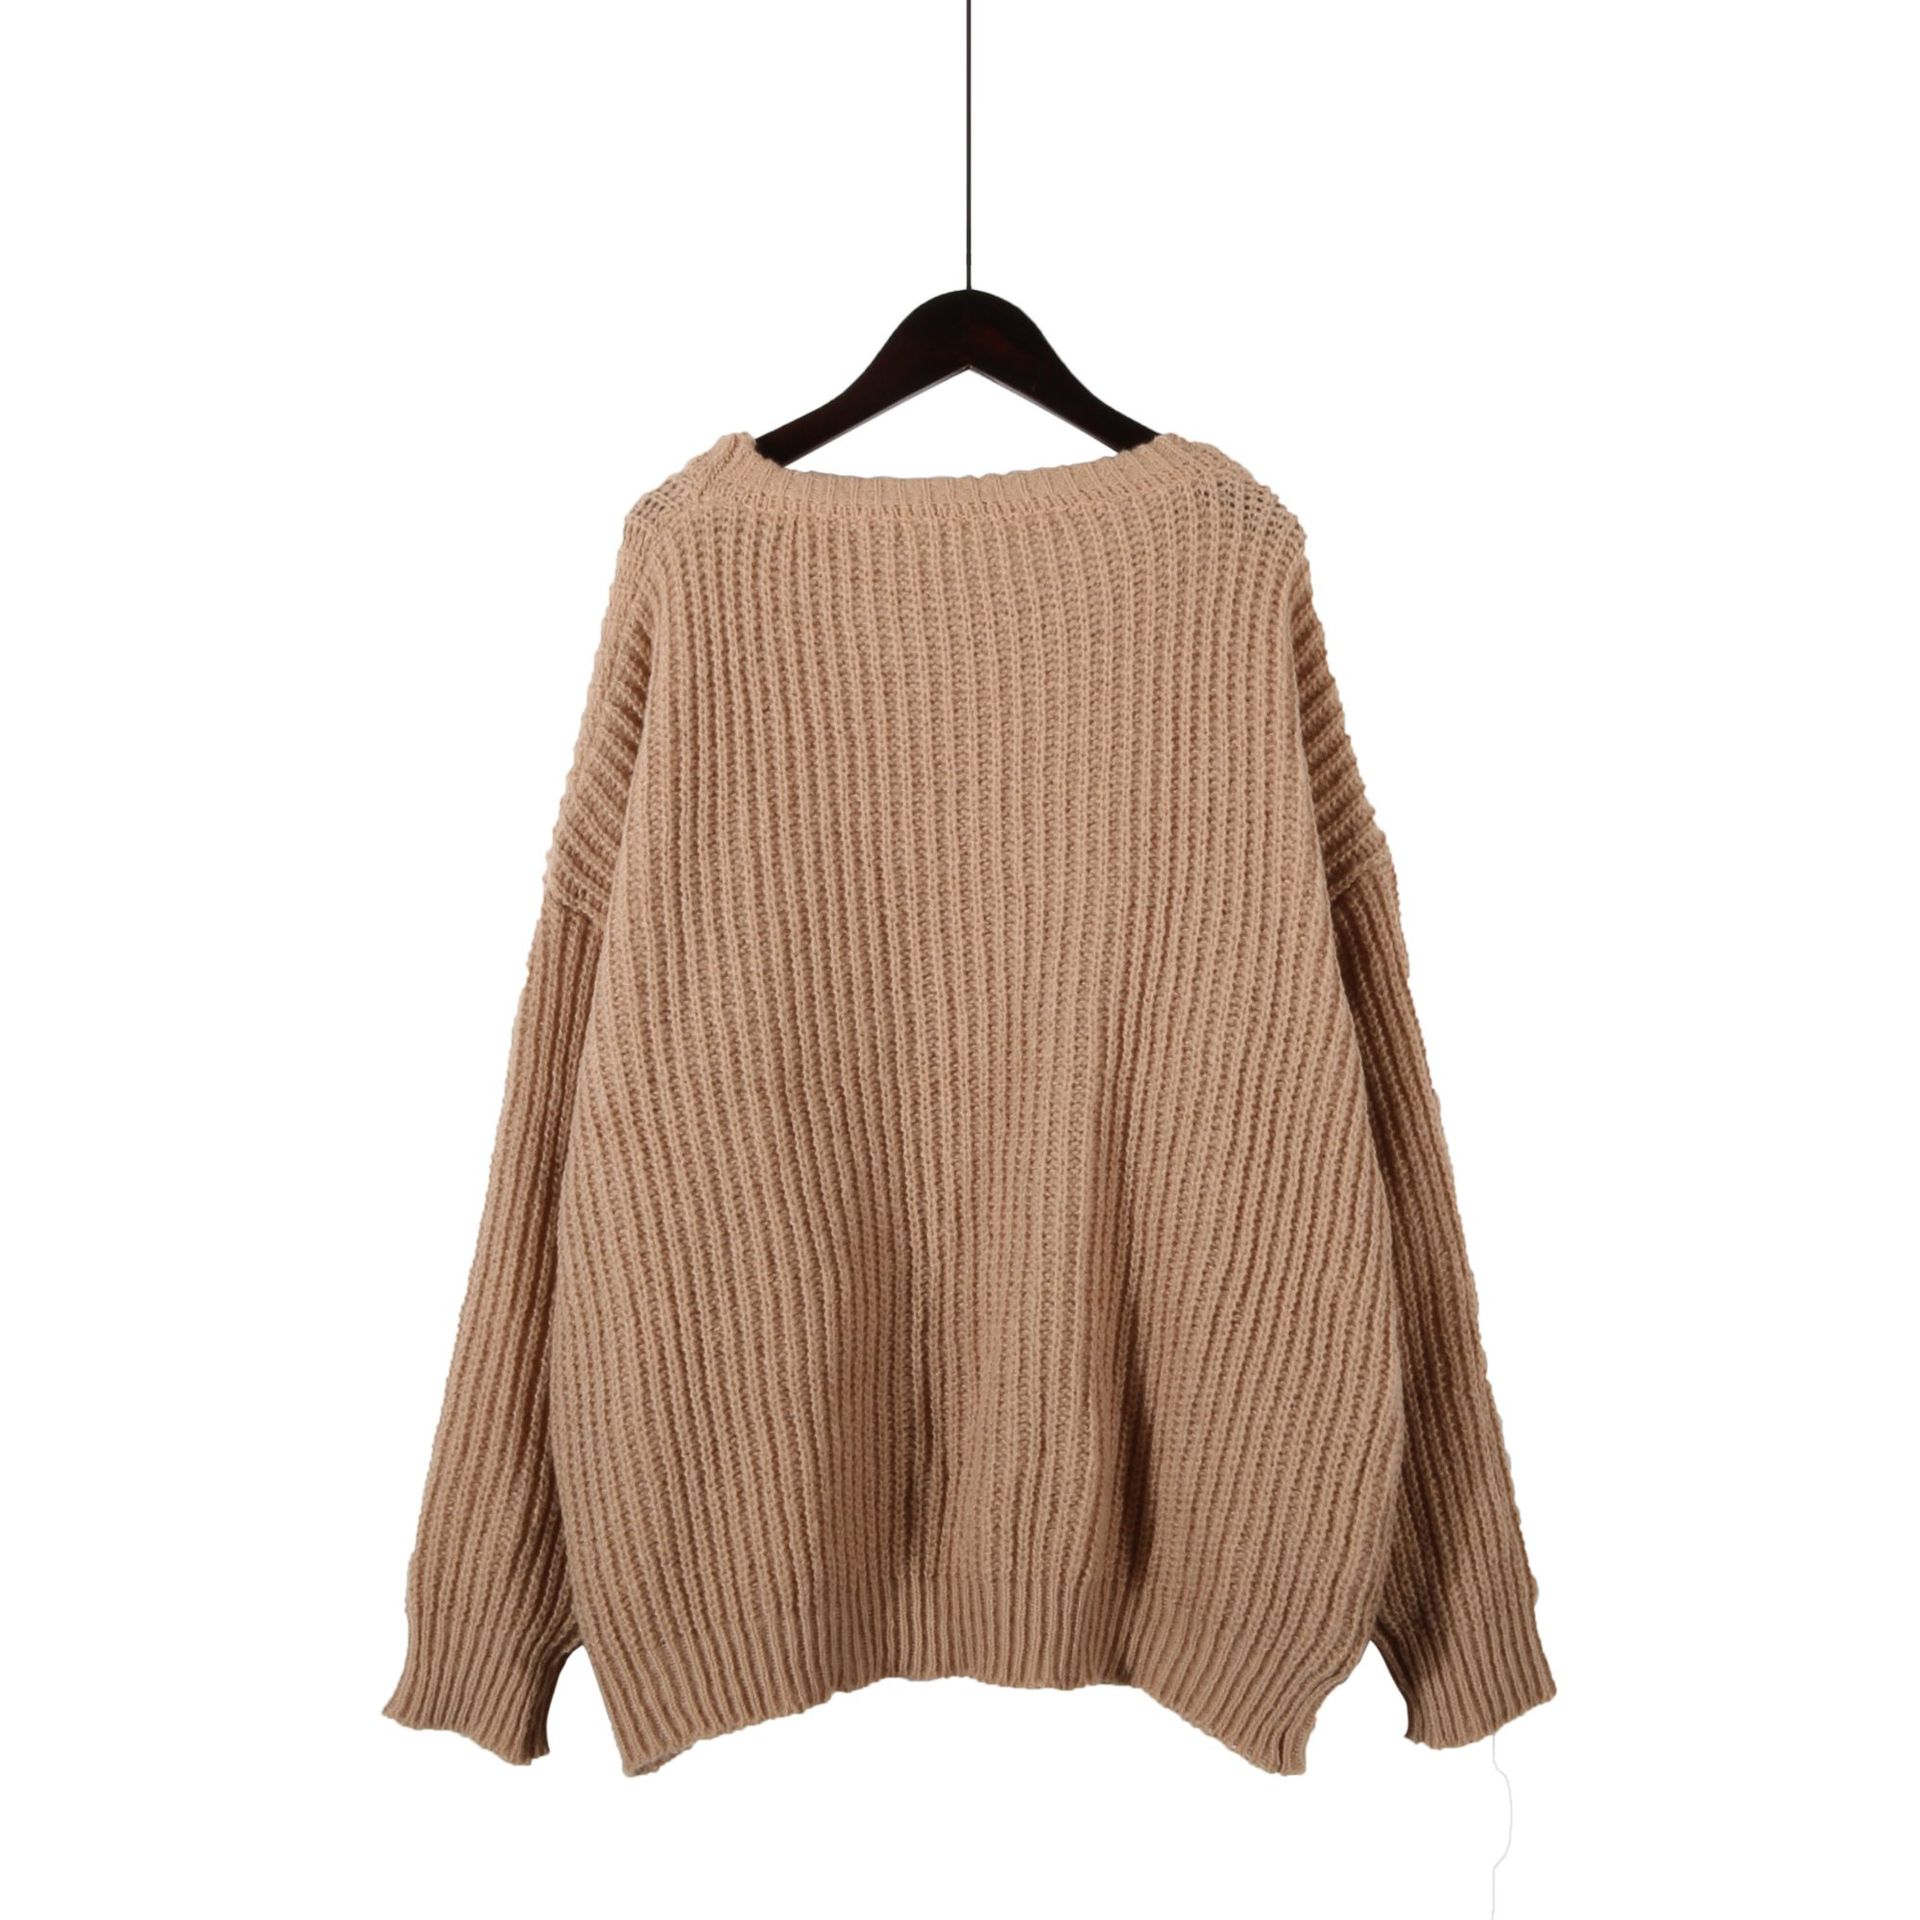 Round Neck Long-Sleeved Knitted Sweater NSSX104233